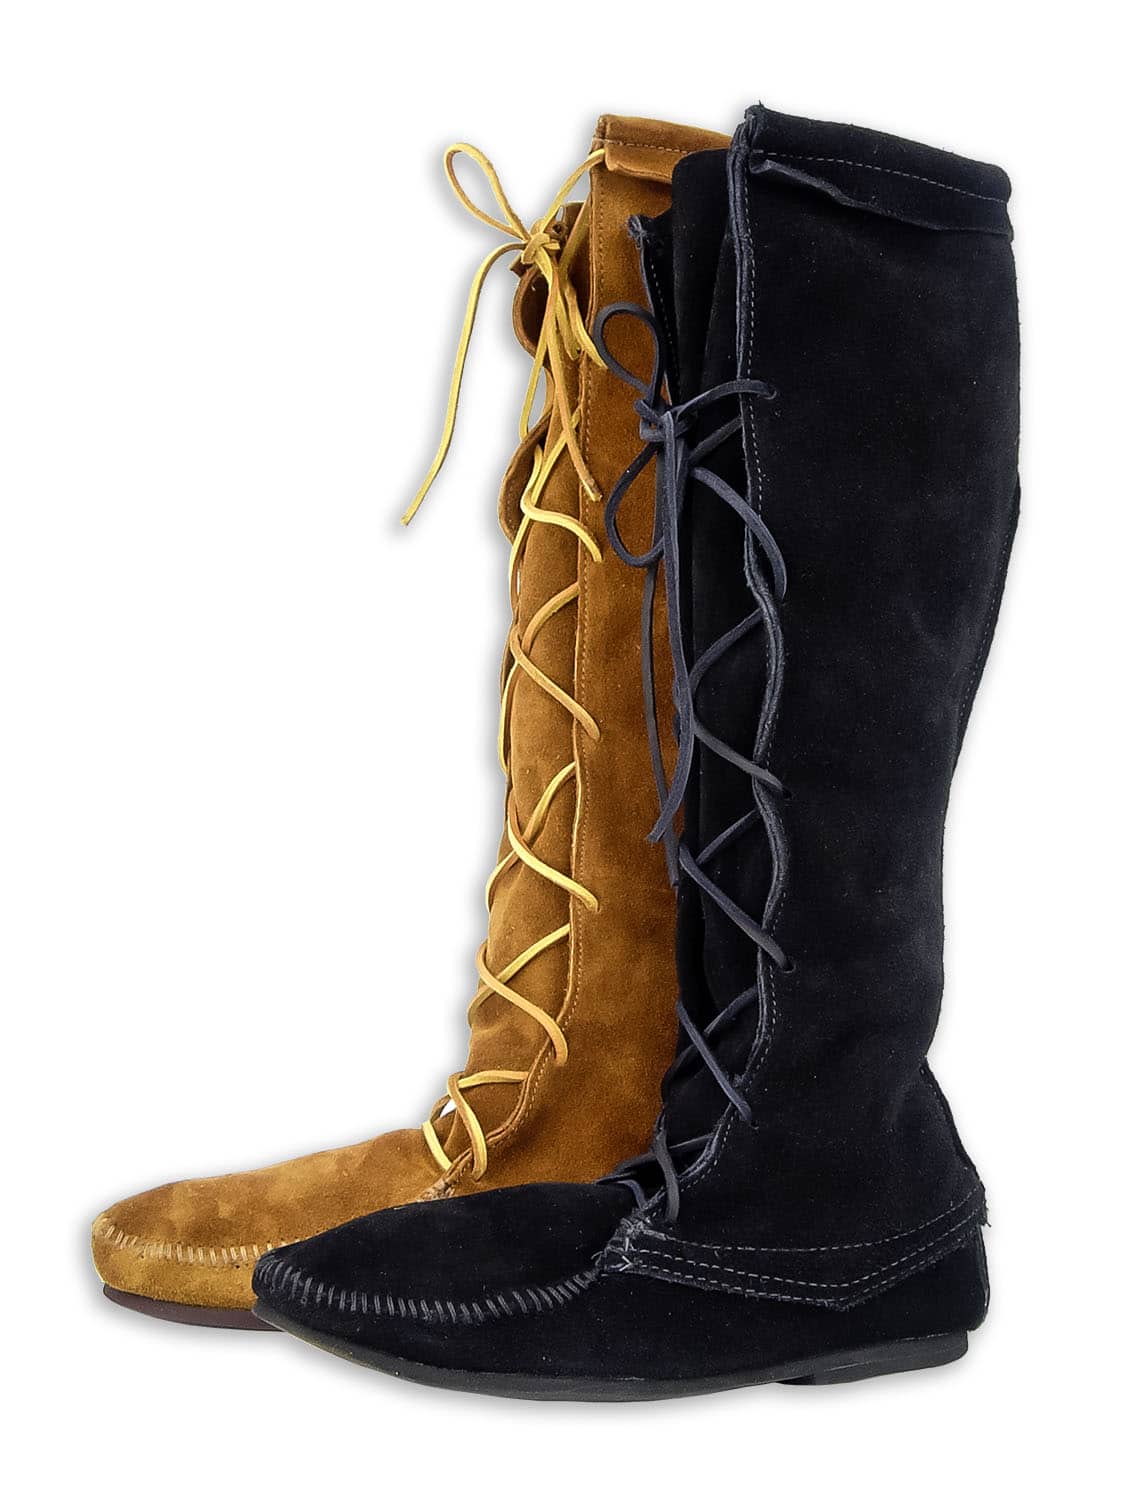 men's tall moccasin boots